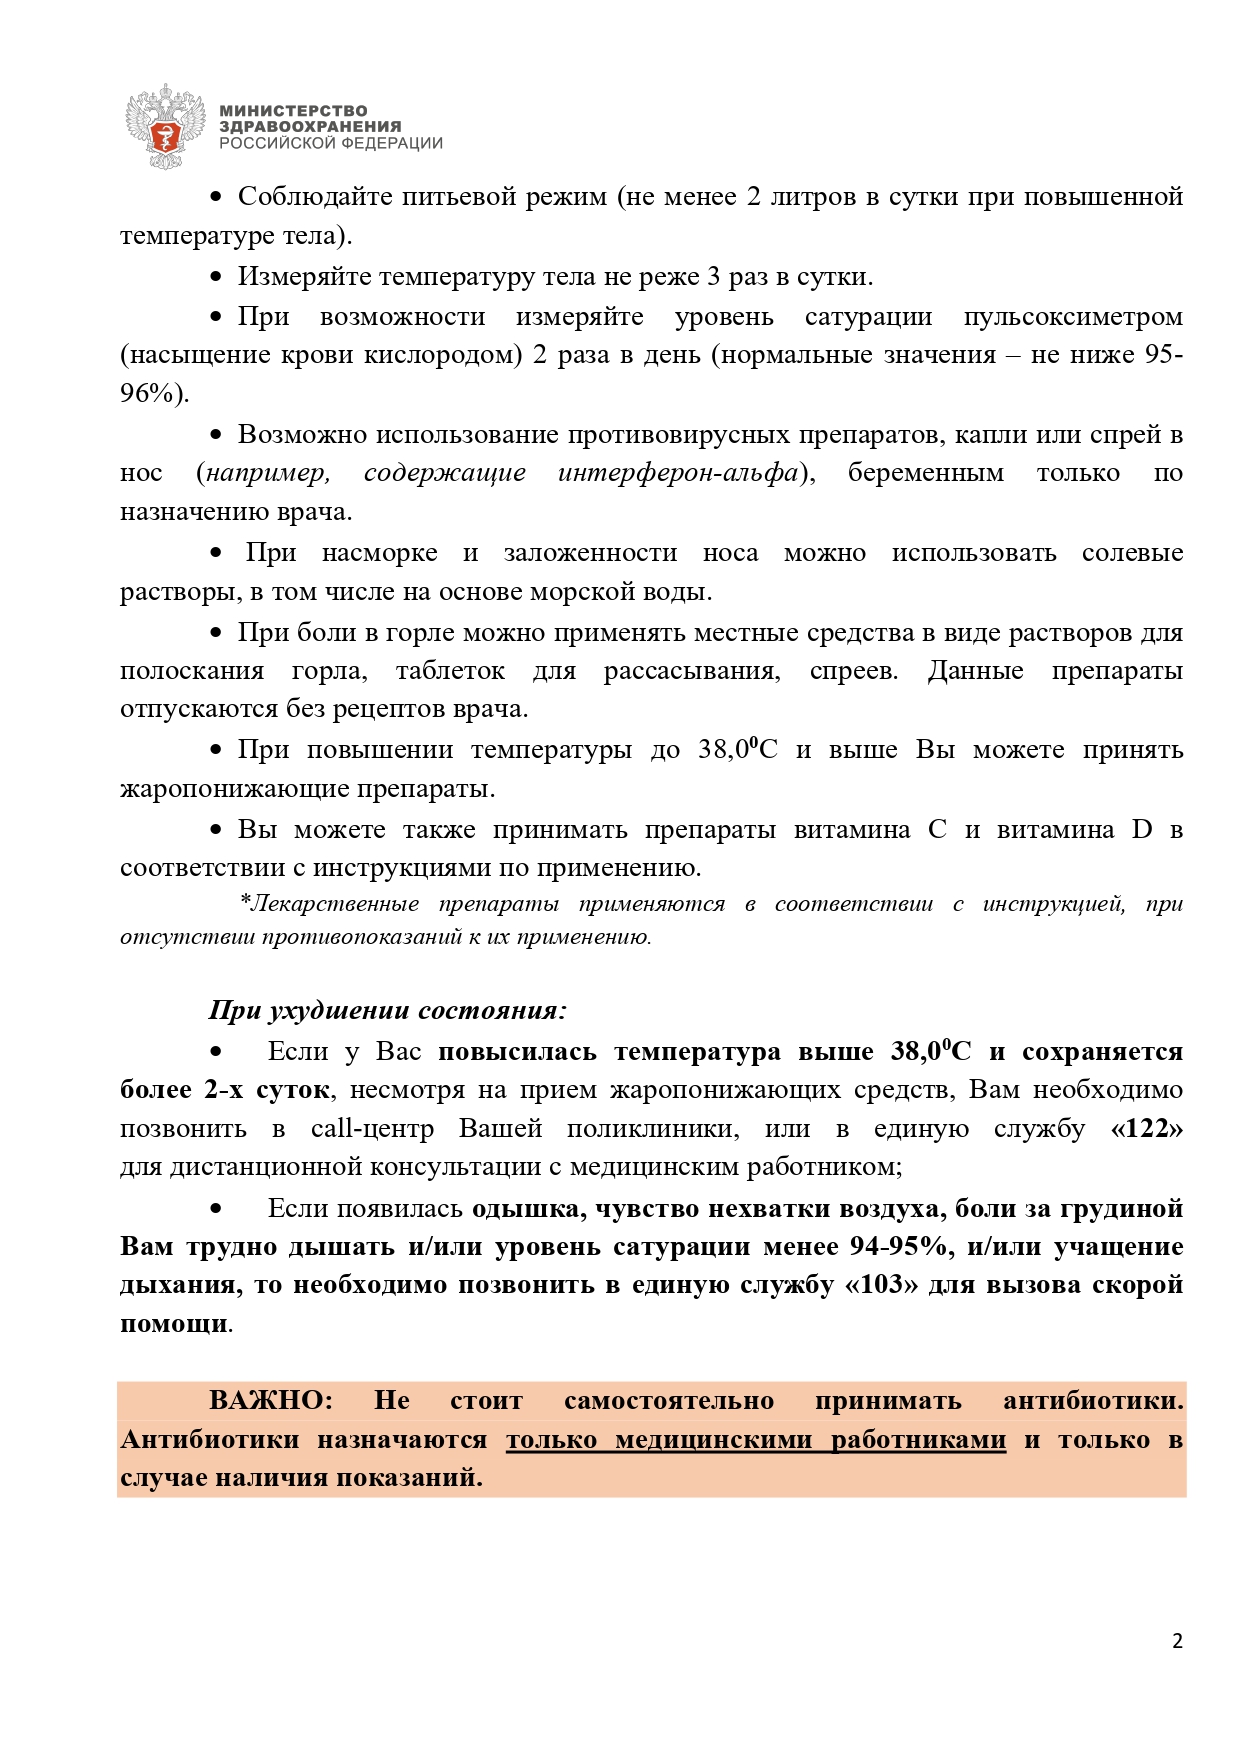 pamyatka_amb_covid19_250122_pages-to-jpg-0002